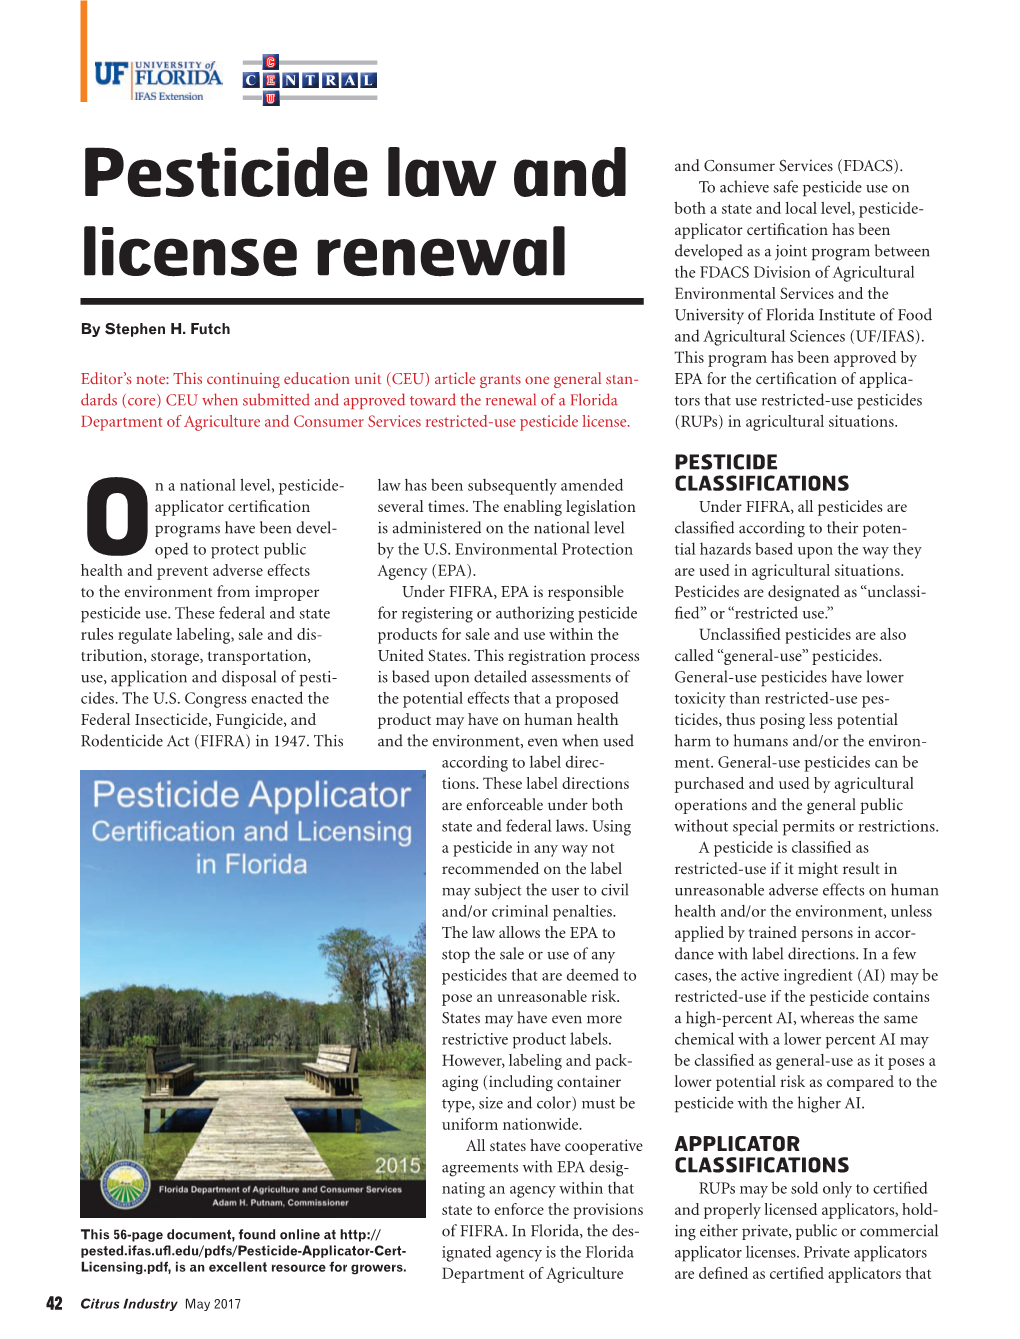 Pesticide Law and License Renewal